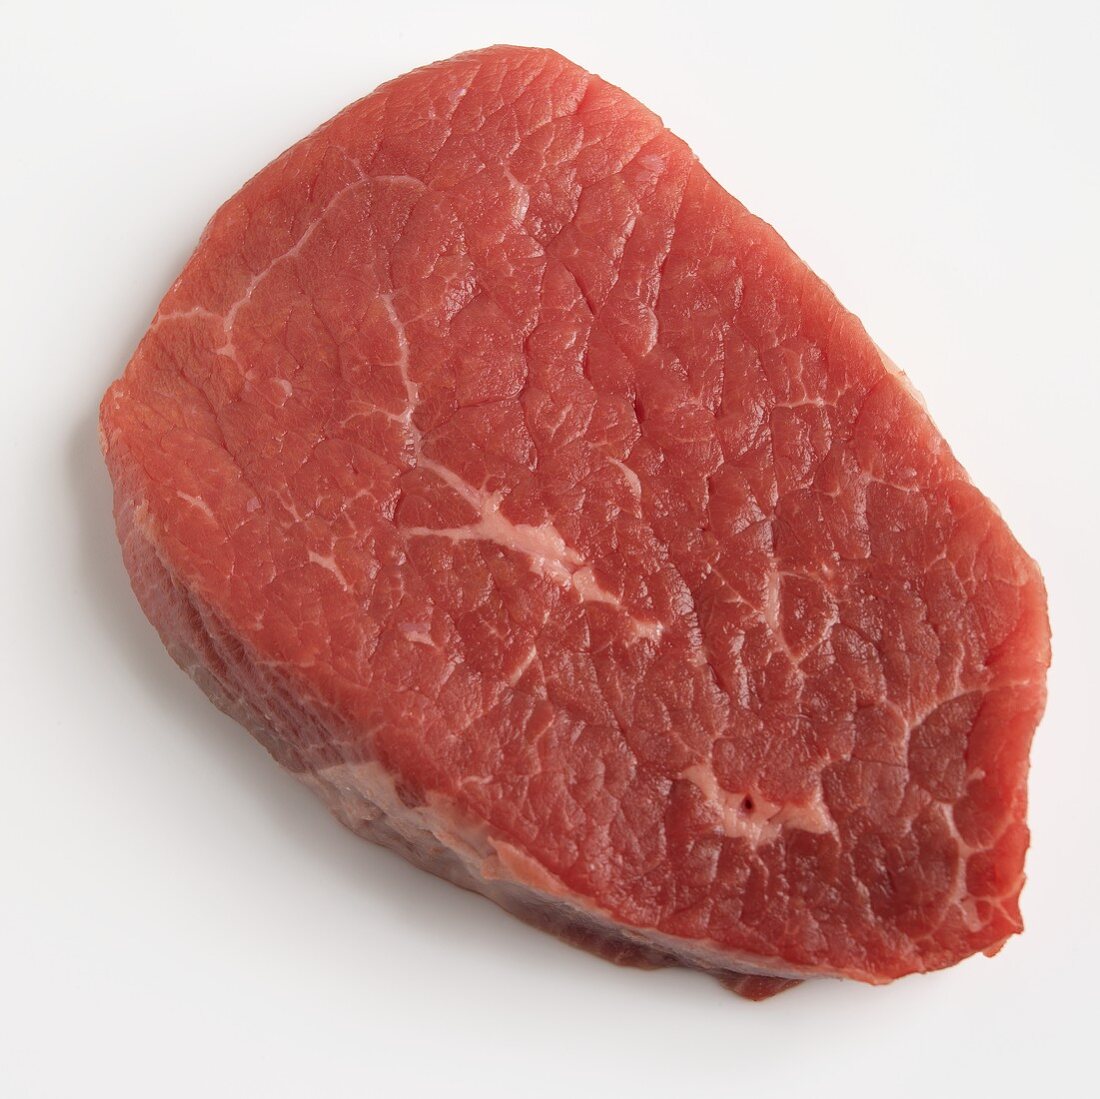 A beef steak on a white surface